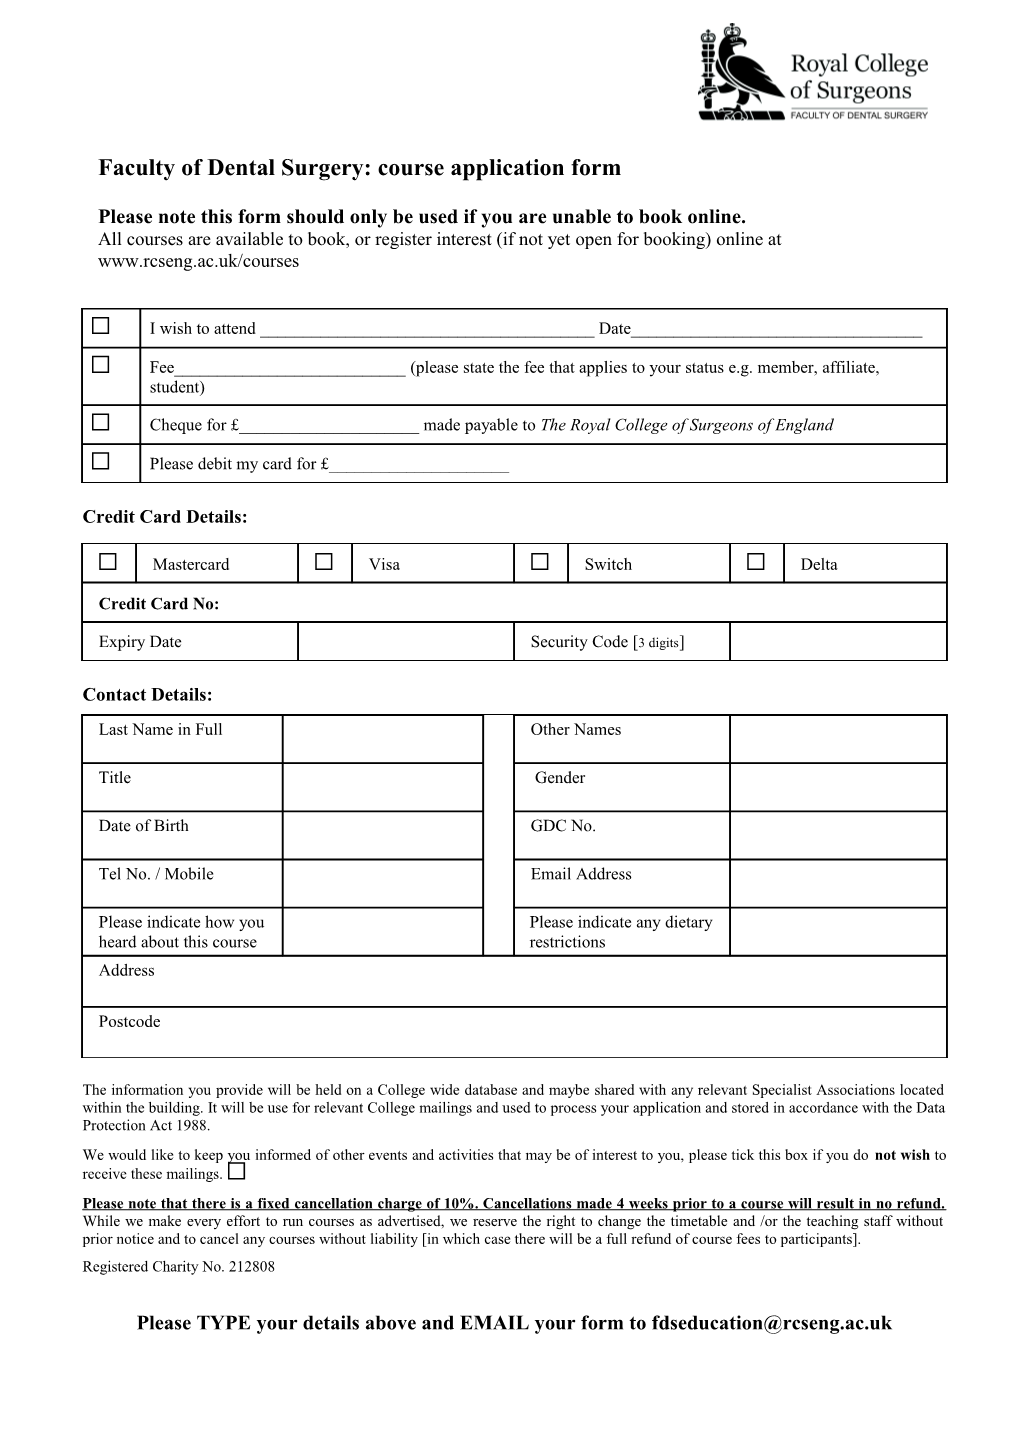 Faculty of Dental Surgery: Course Application Form